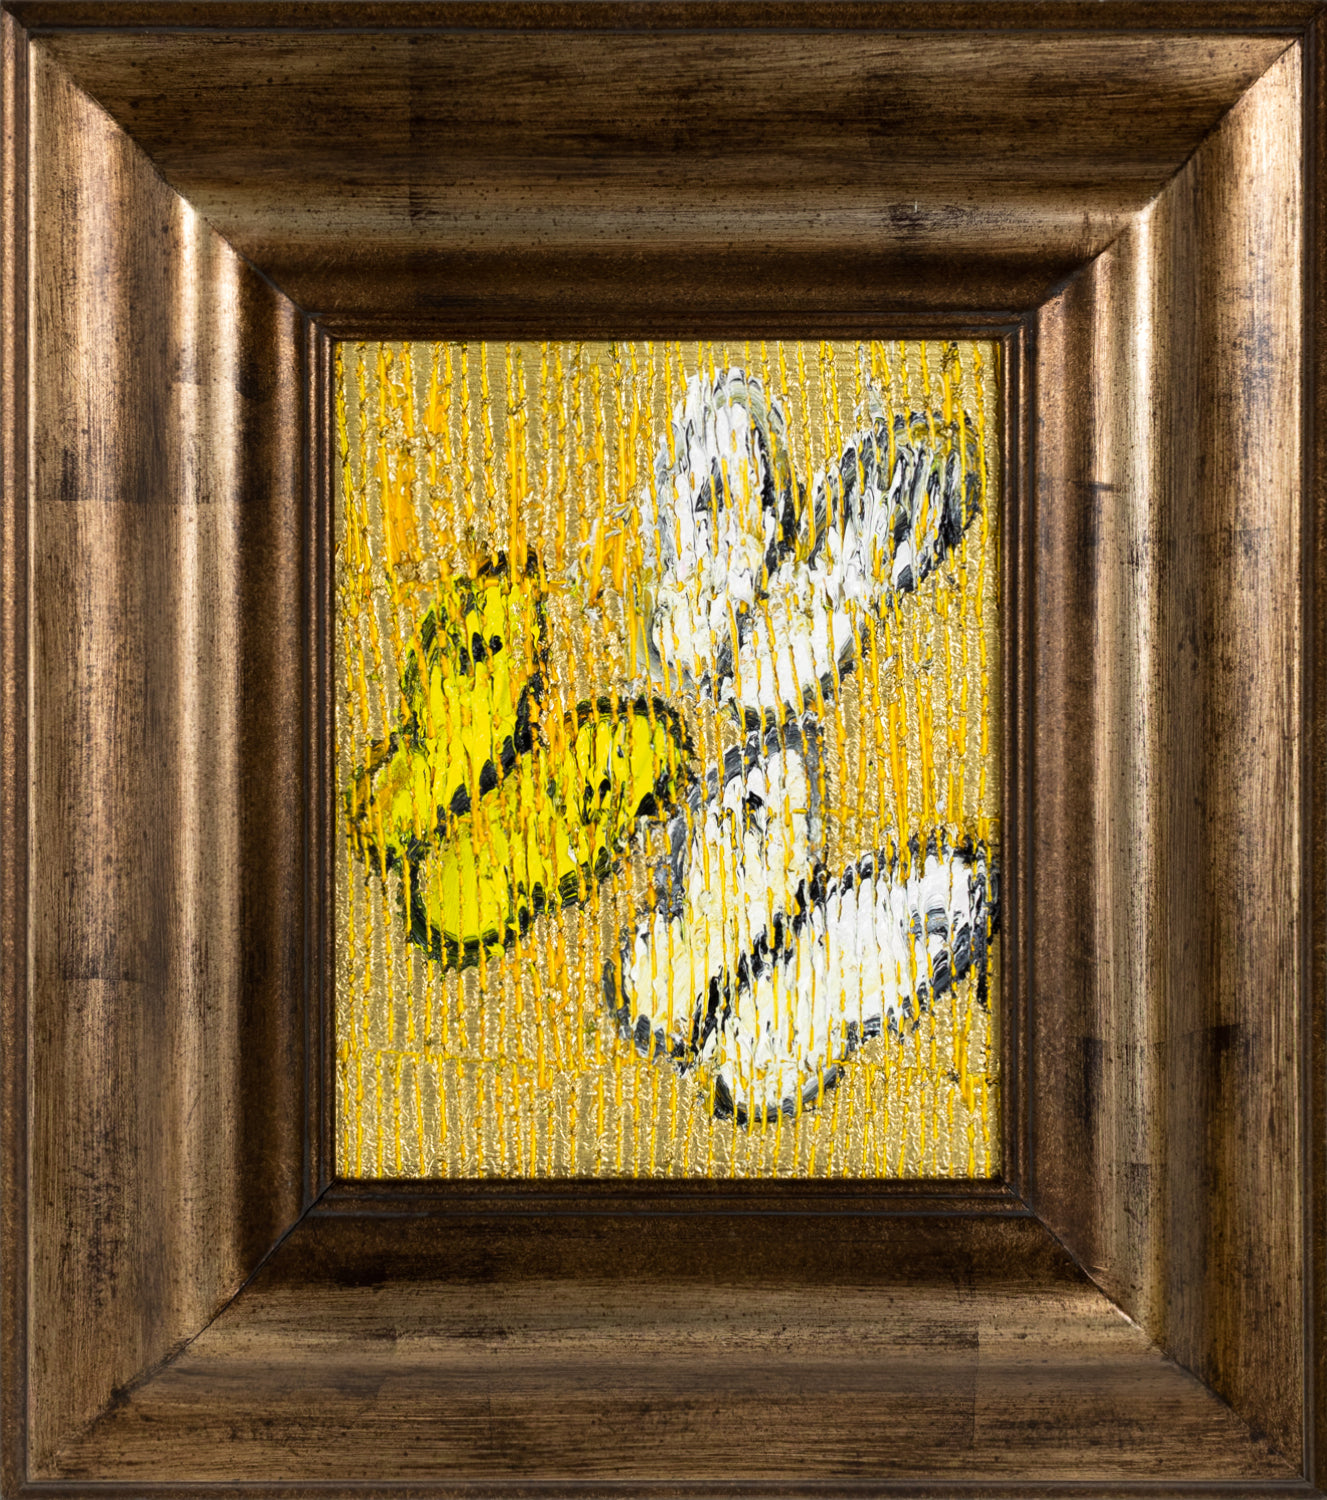 Yellow Hunt Slonem butterfly painting “3 Fly,”2021, Oil on wood, 10 x 8 inches, in antique bronze frame, Hunt Slonem Butterflies for sale at Manolis Projects Gallery